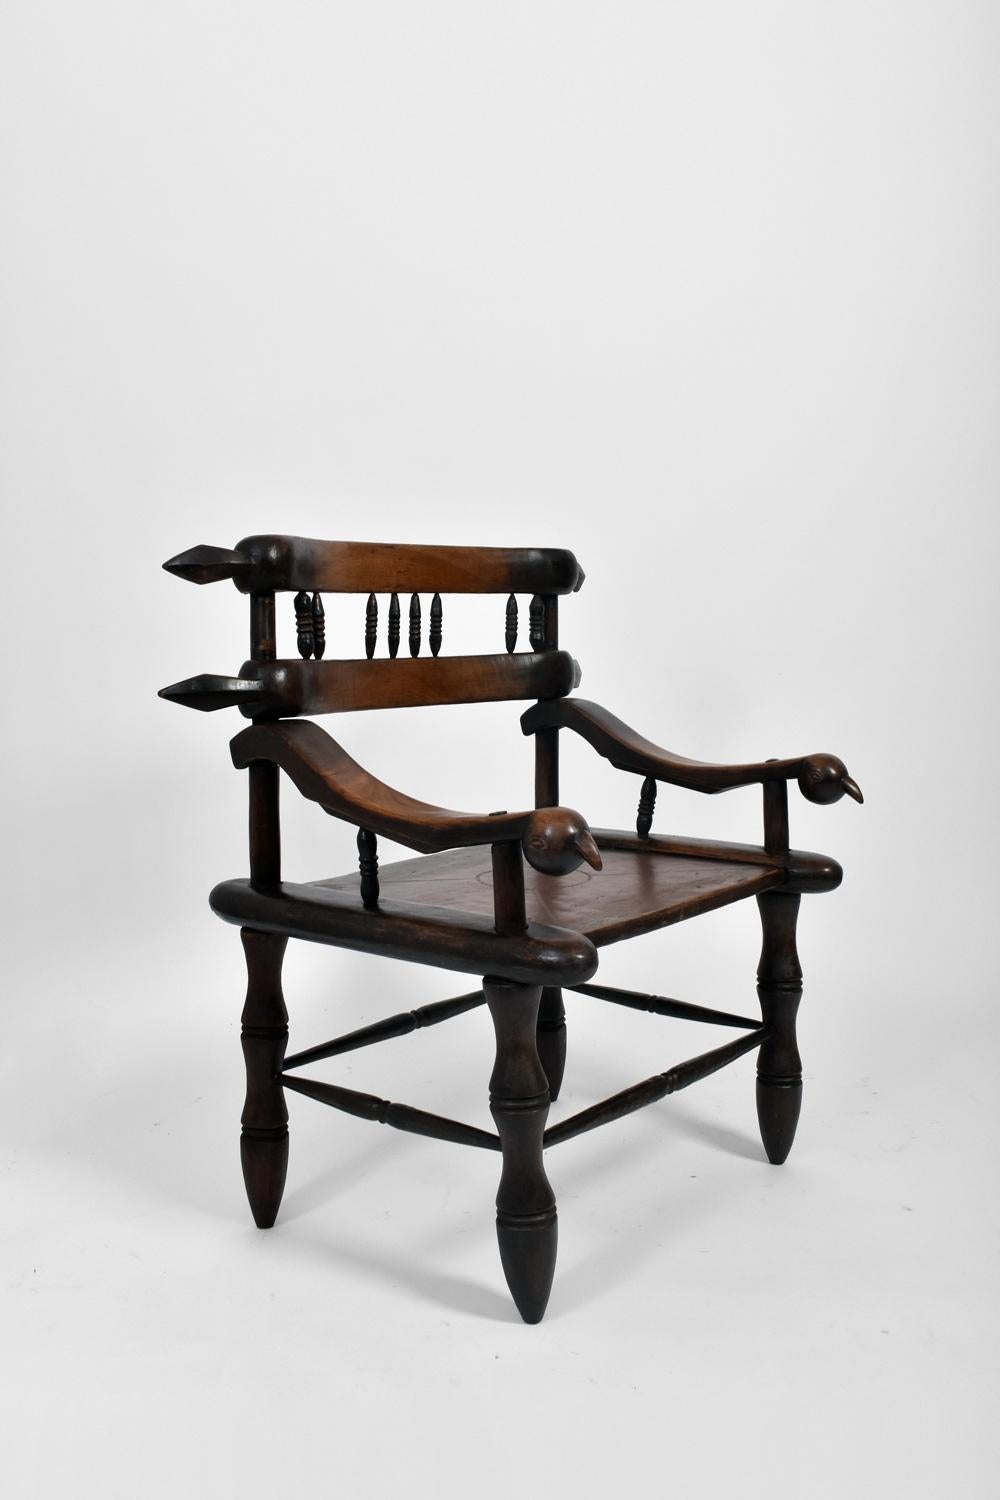 Large pair of ceremonial armchairs in carved wood with zoomorphic armrests in the shape of birds, the backrest with spindle bars, round legs. African work, 20th c.